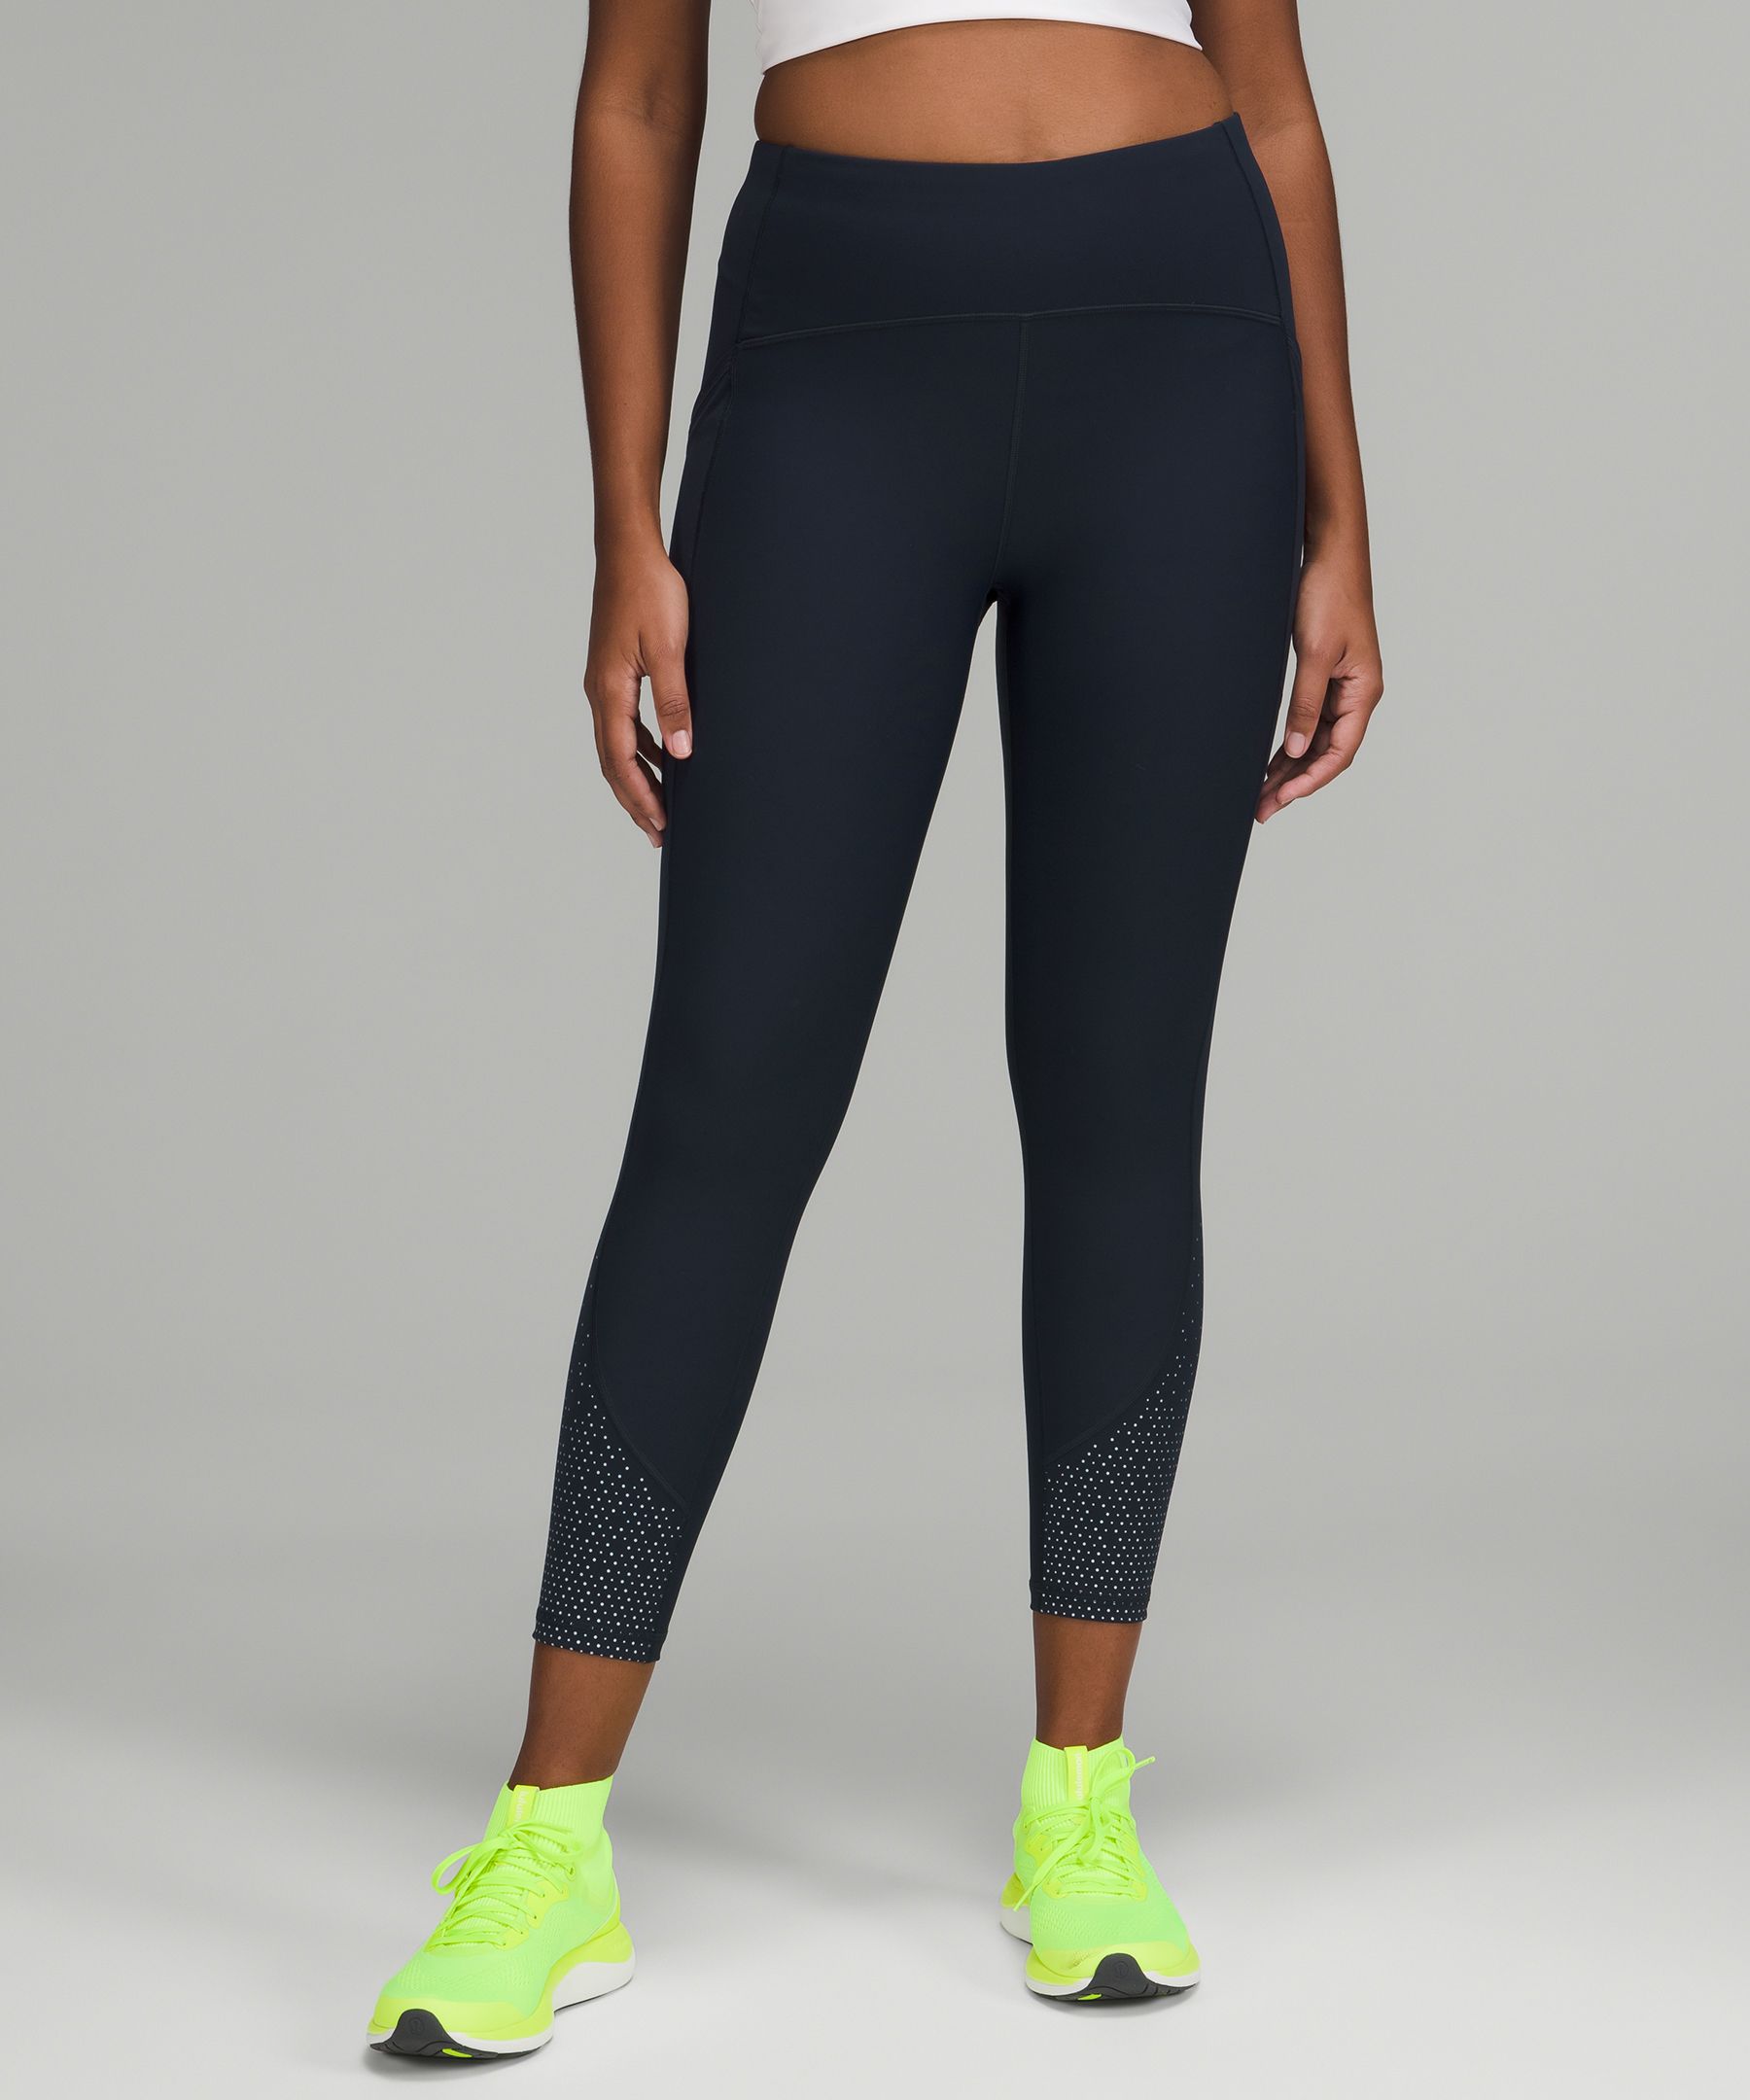 Lululemon tight stuff tight review wine berry 3 - Agent Athletica